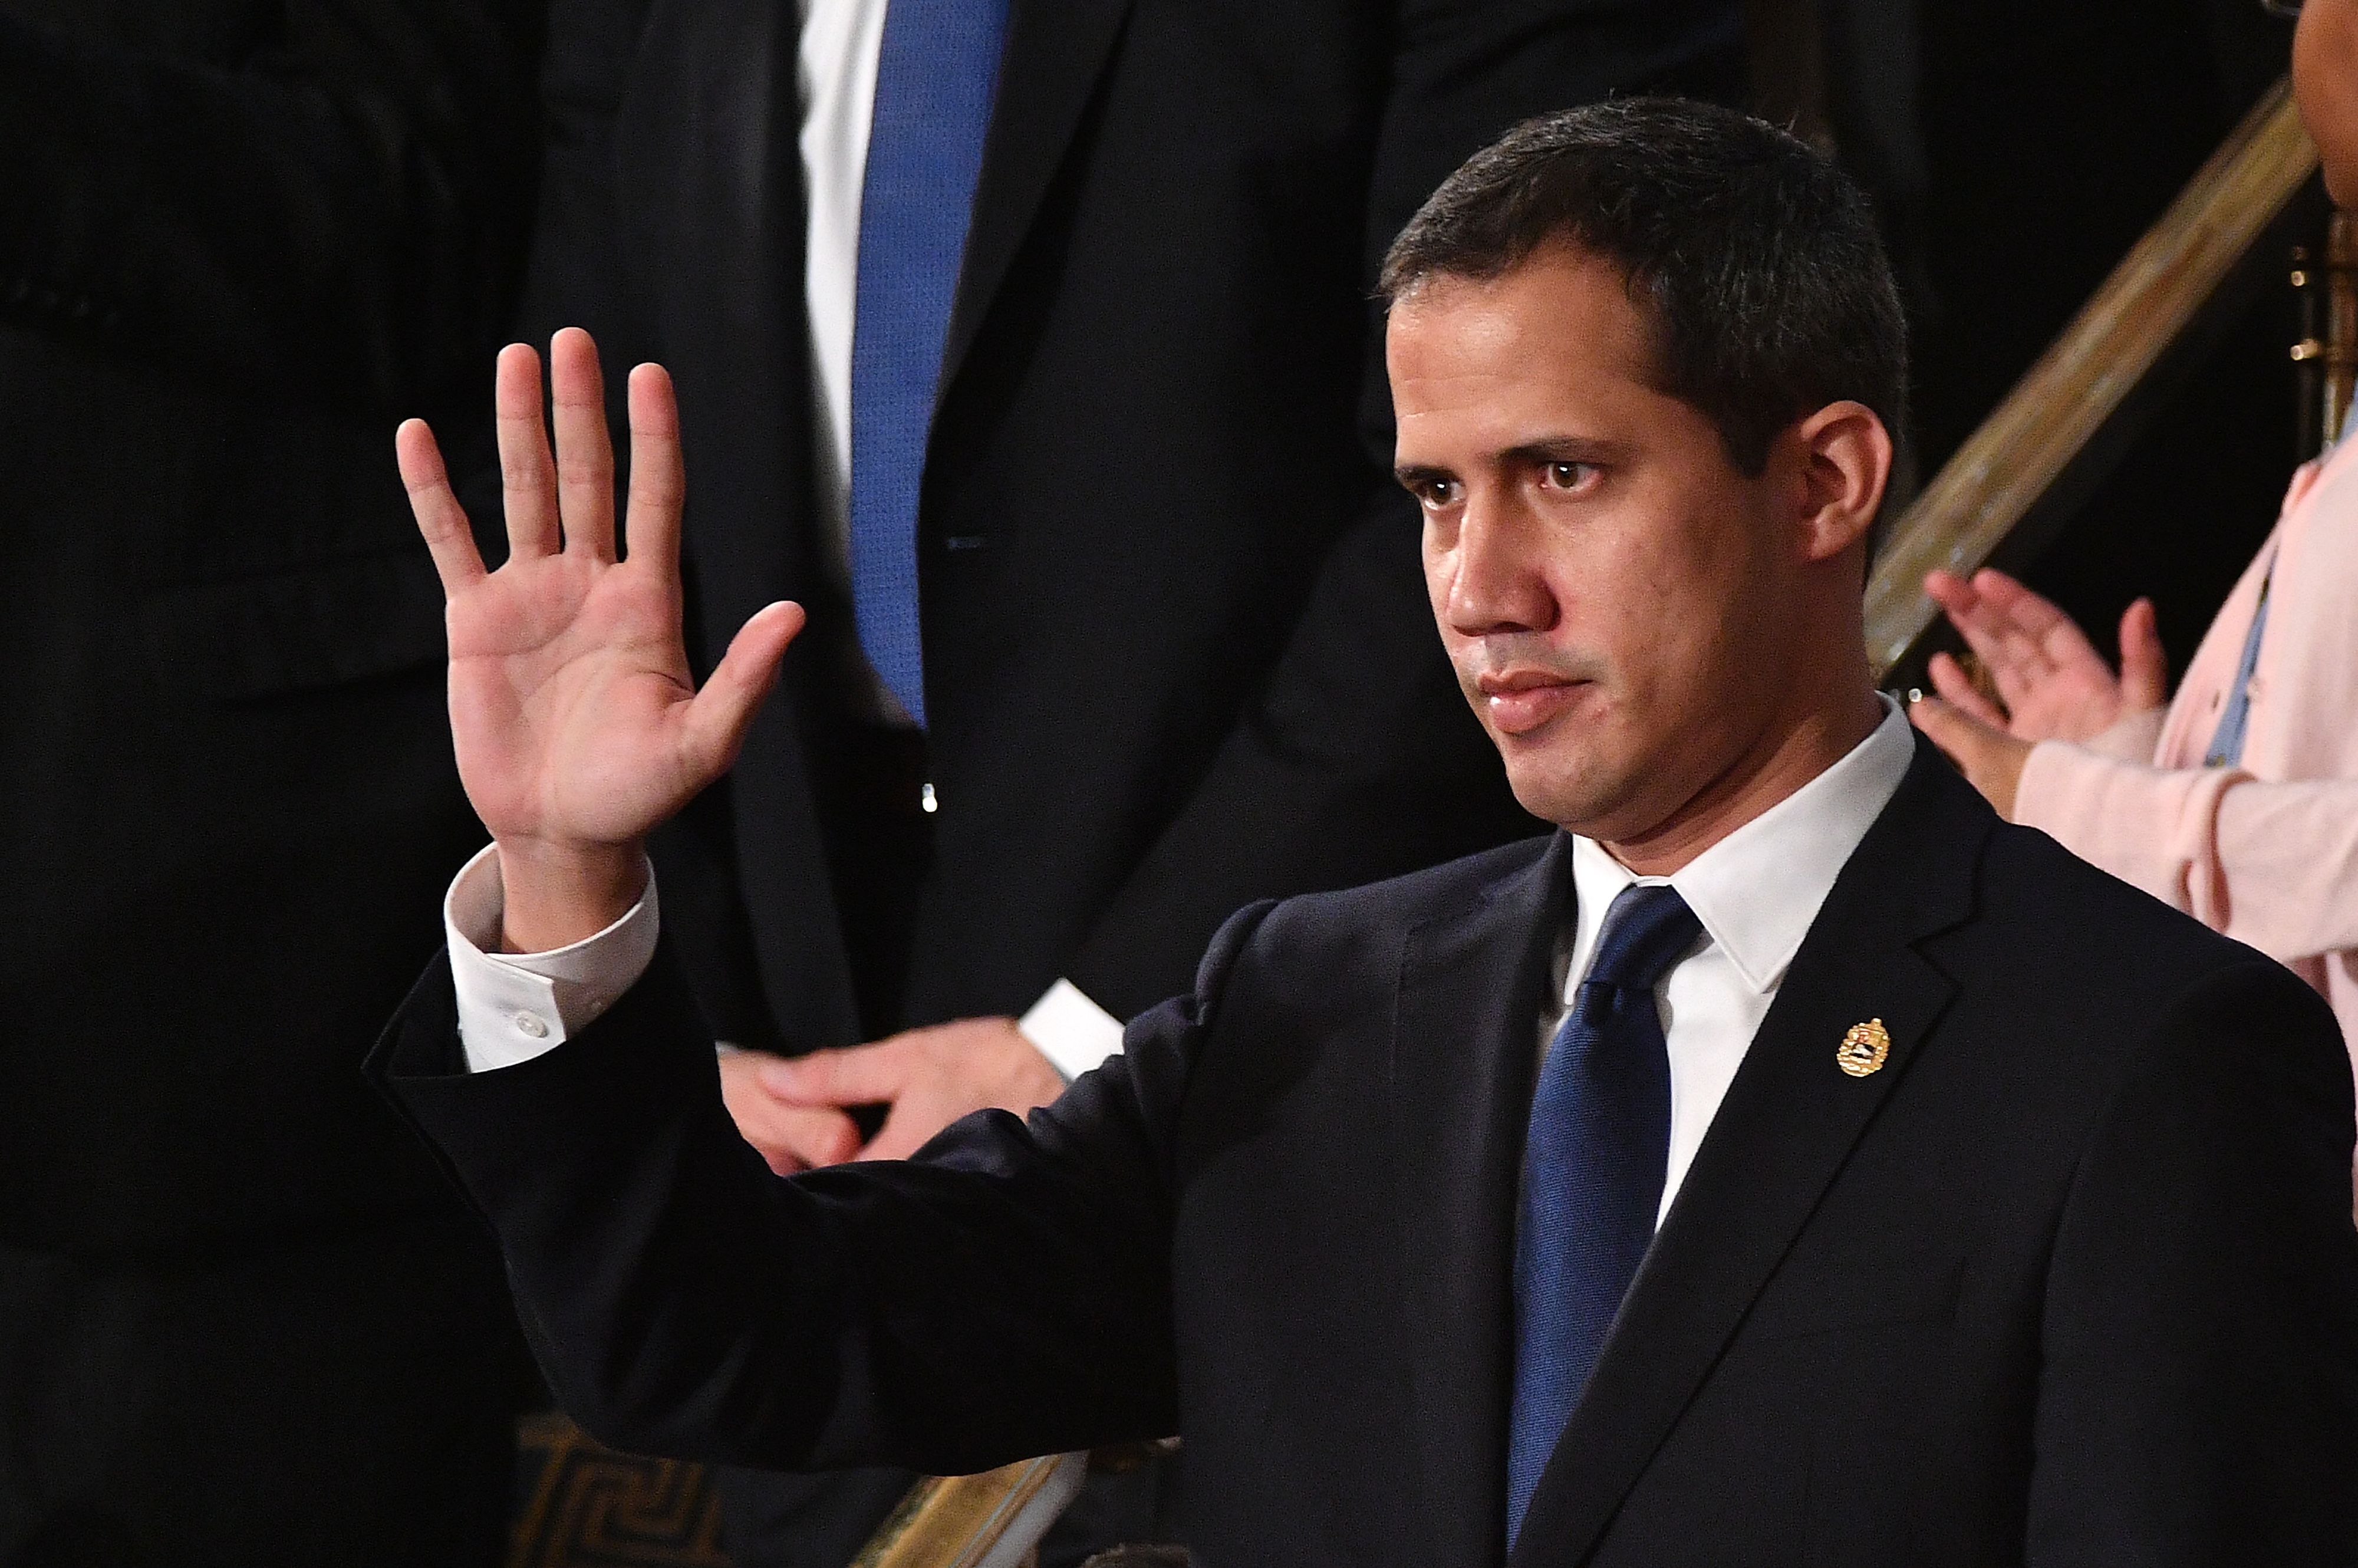 Venezuelan opposition leader Juan Guaido (C) waves as he is acknowledged by US President Donald Trump during his the State of the Union address at the US Capitol in Washington, DC, on February 4